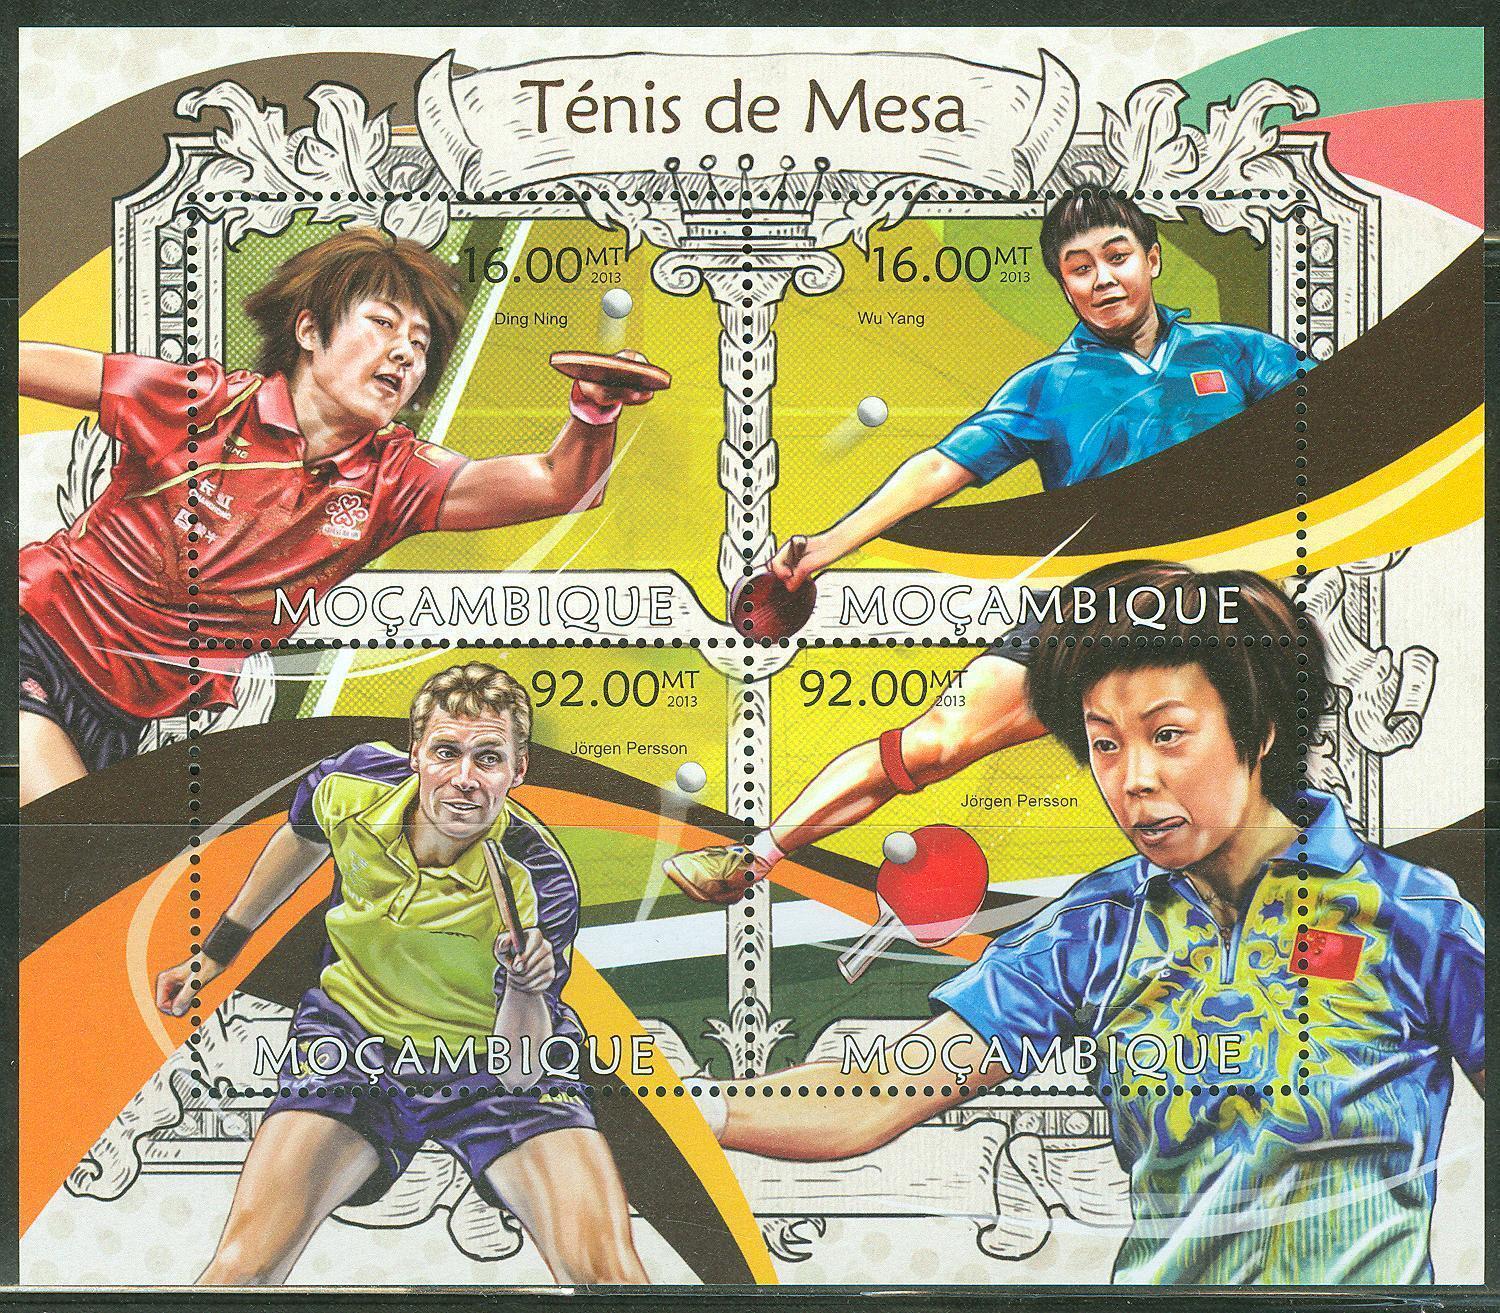 Mozambique 2013 Ping Pong Table Tennis   Sheet Mint Nh